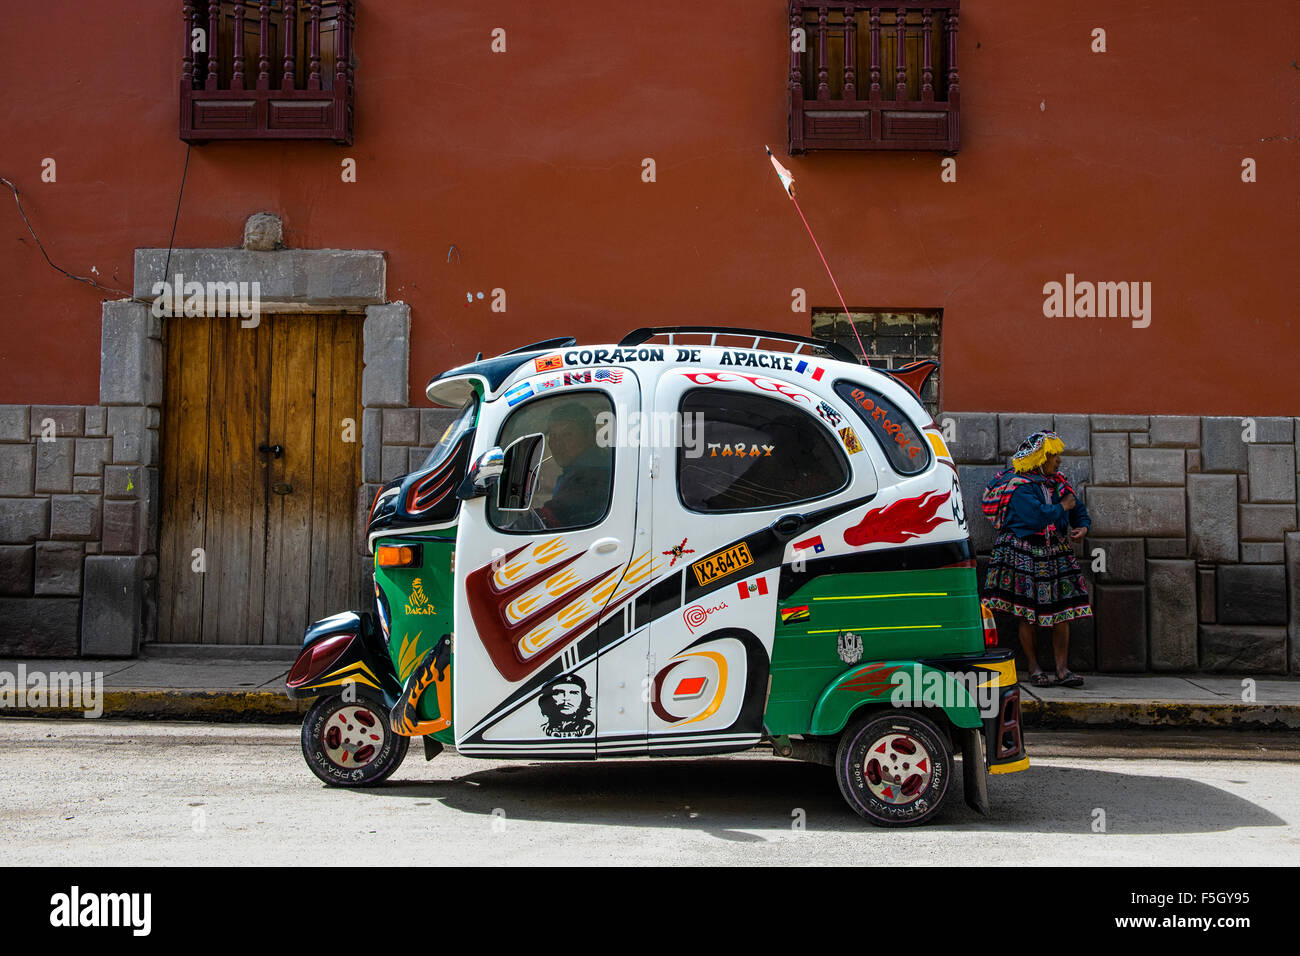 Pisac, Peru - December, 2013: A tuc tuc taxi parked in a street of Pisac. Stock Photo